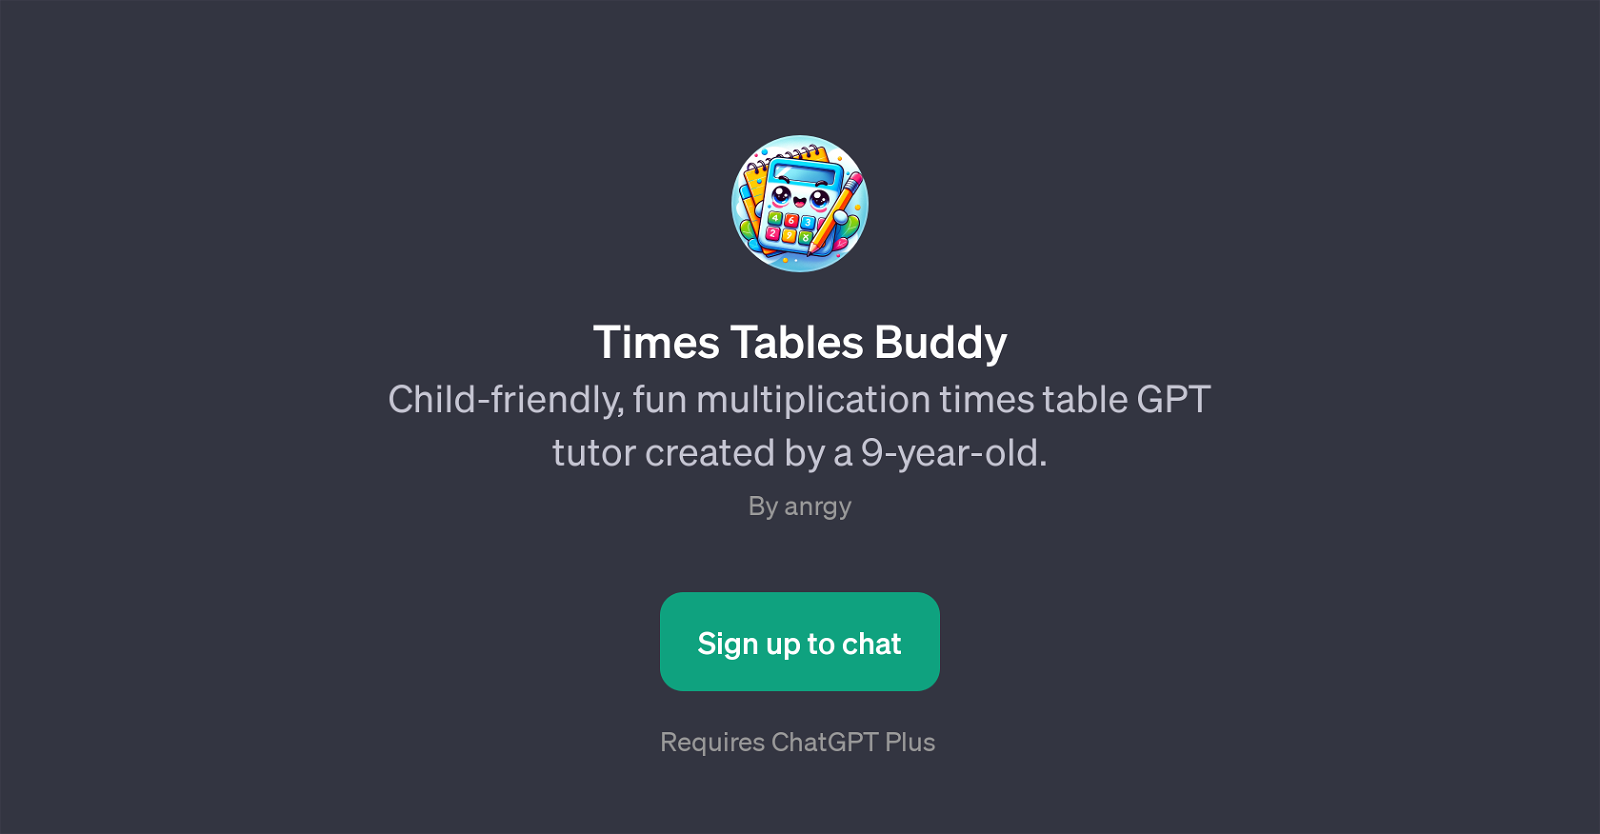 Times Tables Buddy website